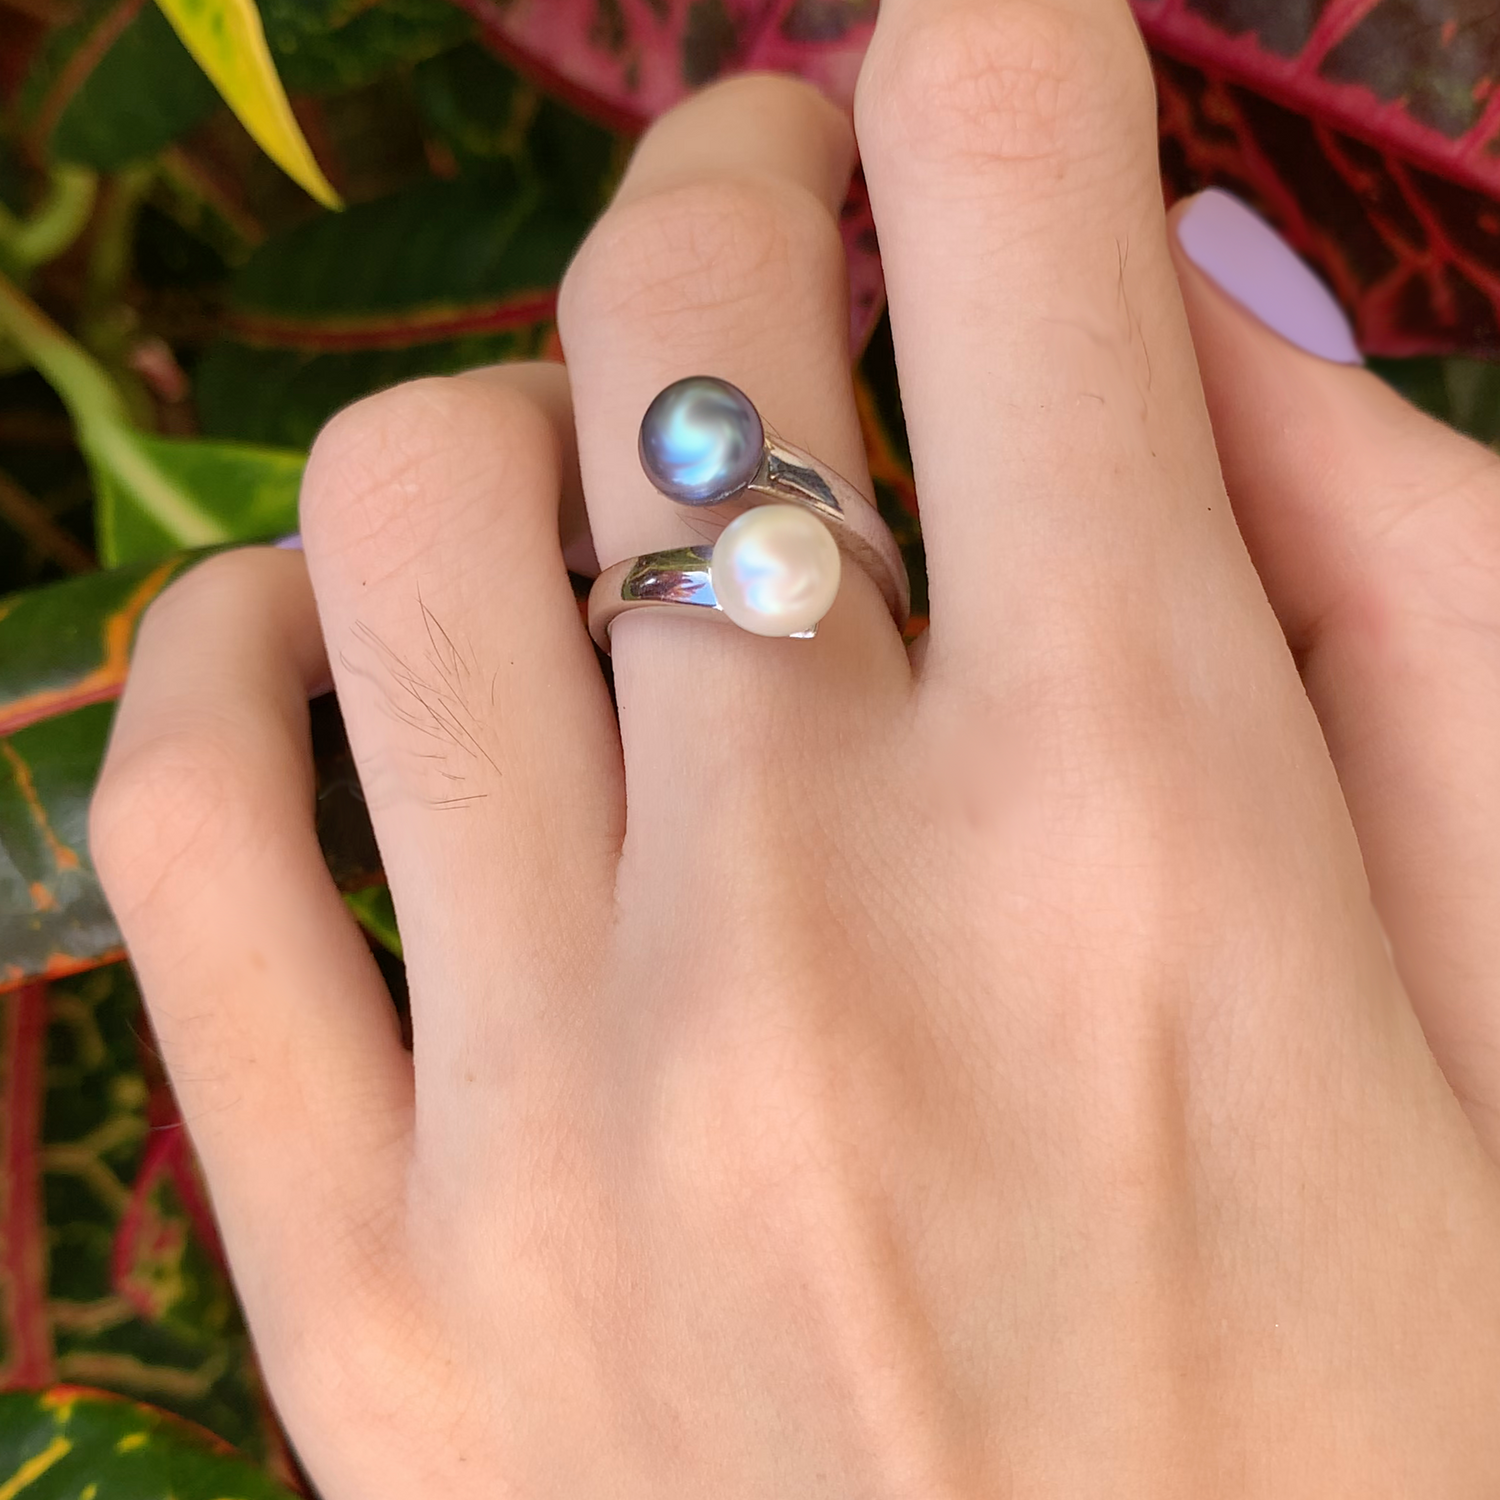 Maile Pearl Adjustable Wrap Ring